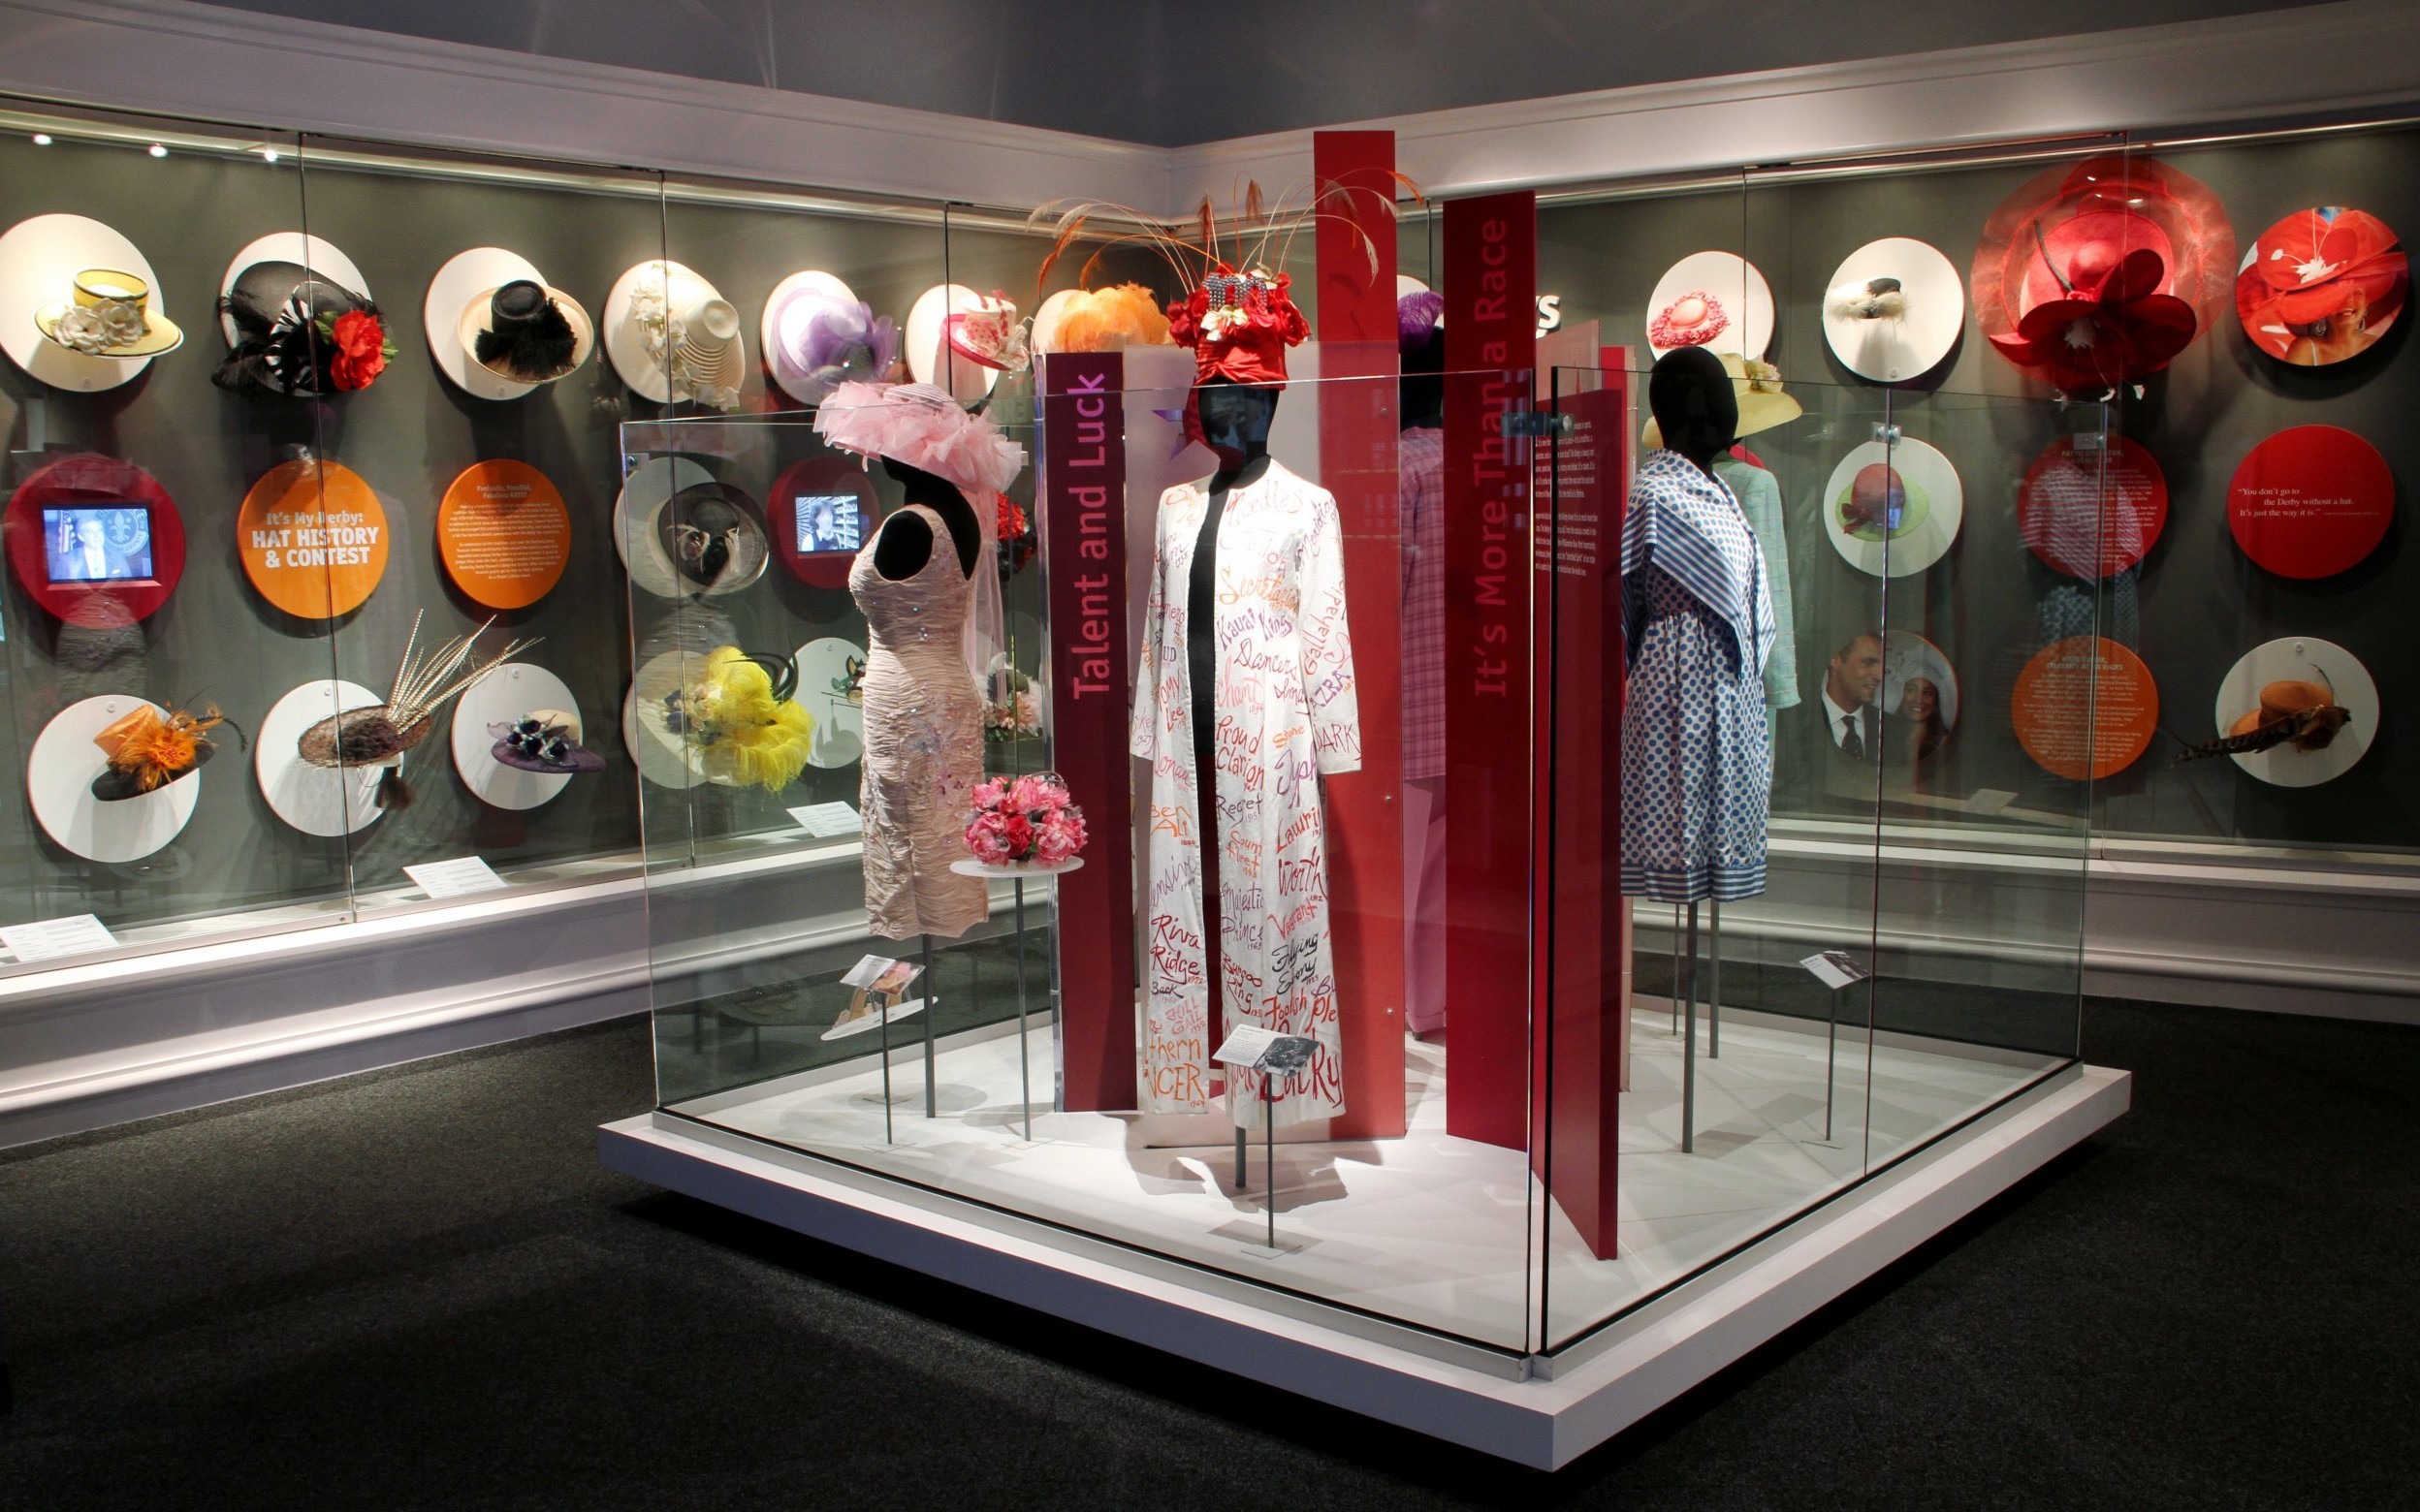 2018 It’s My Derby Hat Contest hats now on display at the Kentucky Derby Museum